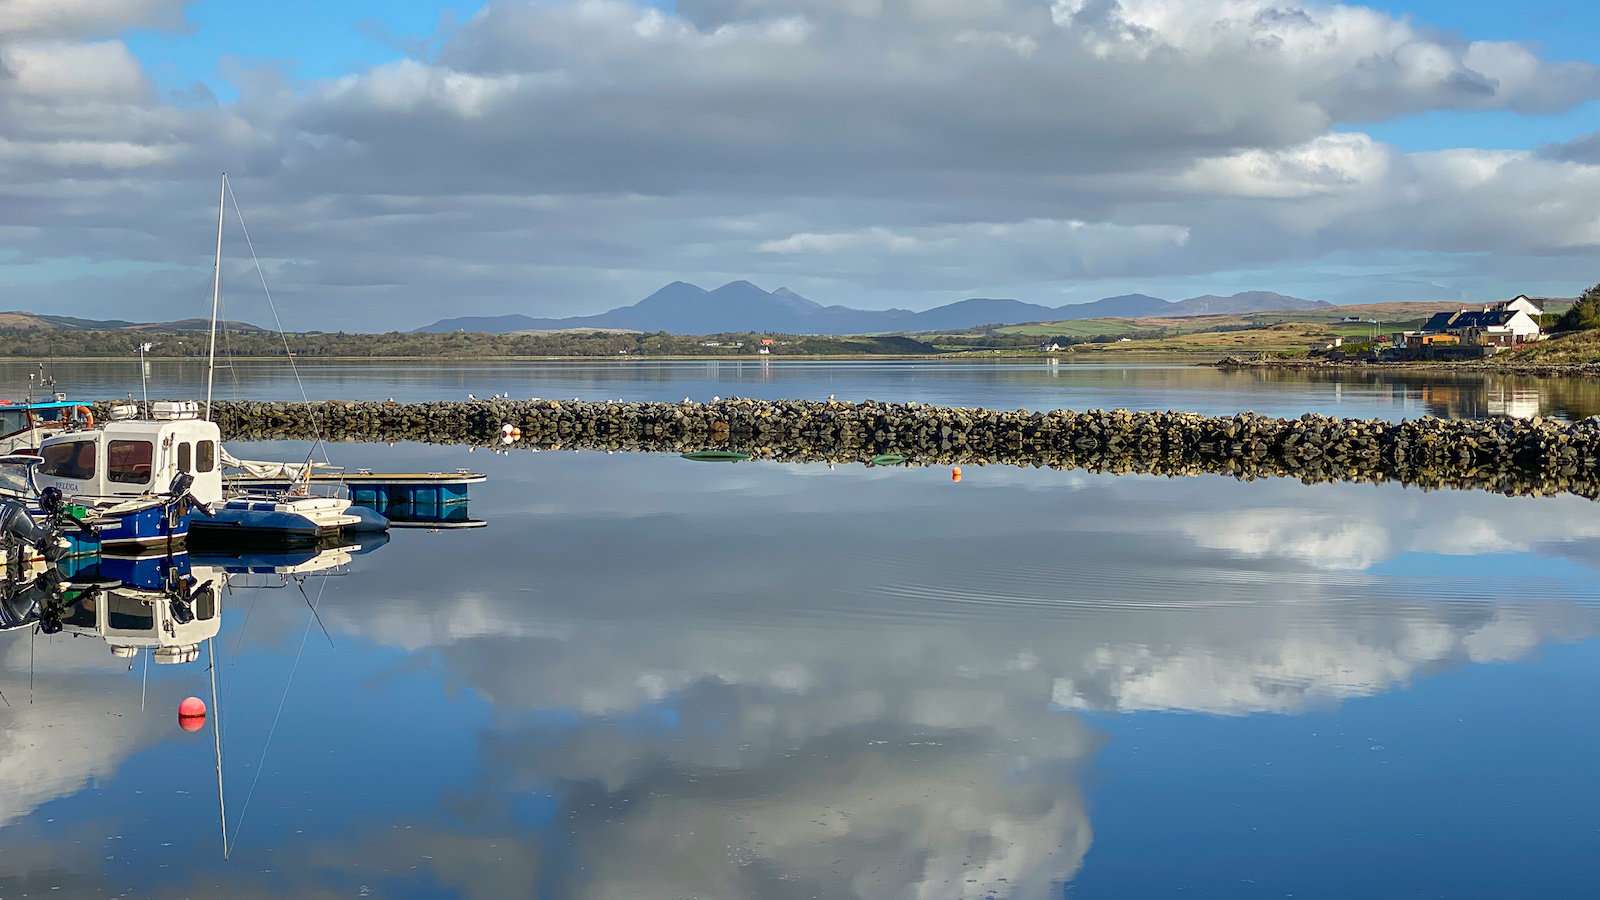 Bowmore is the capital of the Isle of Islay and has plenty to explore